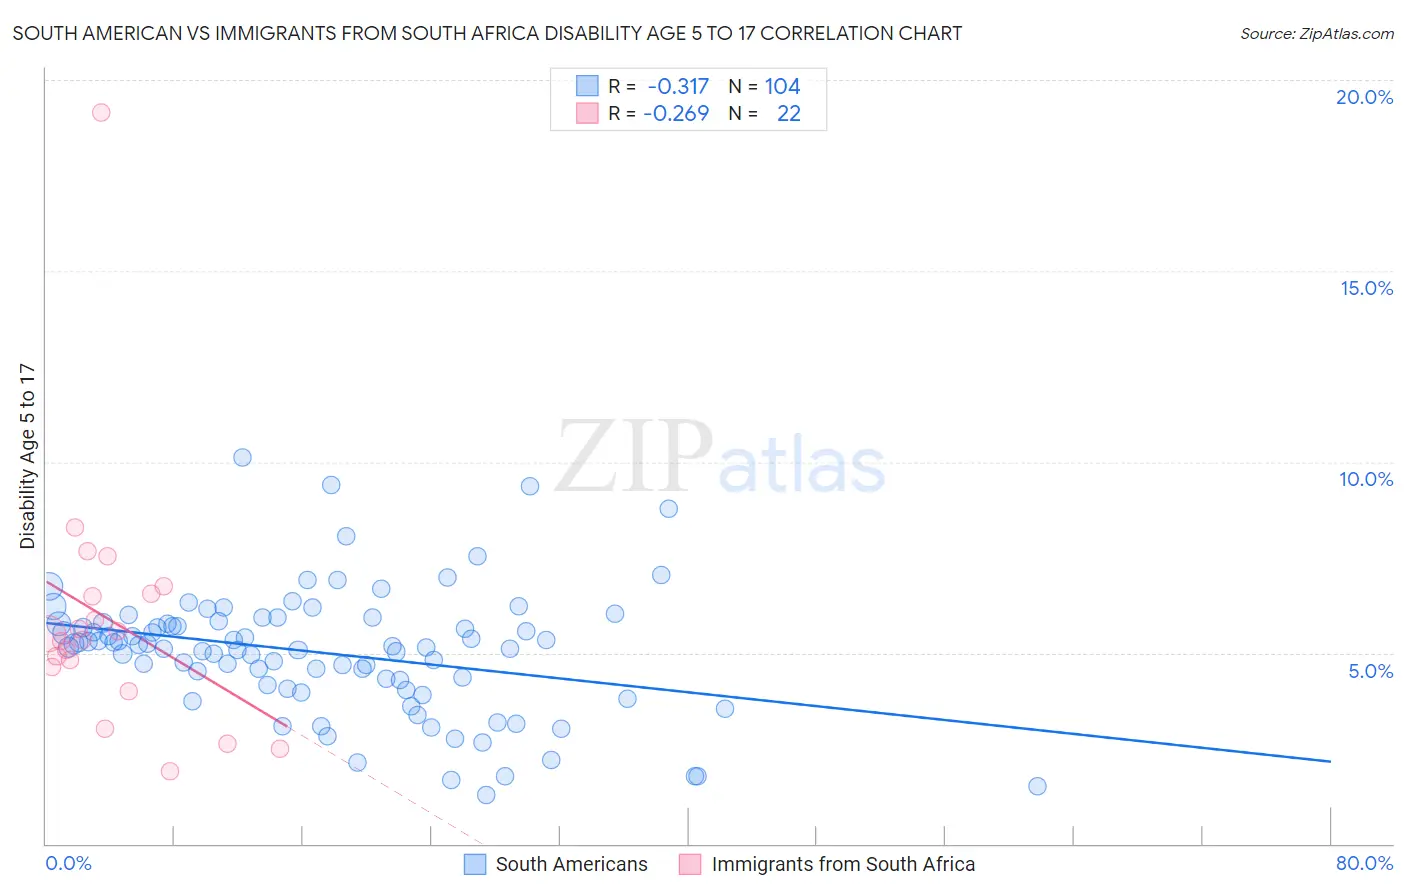 South American vs Immigrants from South Africa Disability Age 5 to 17